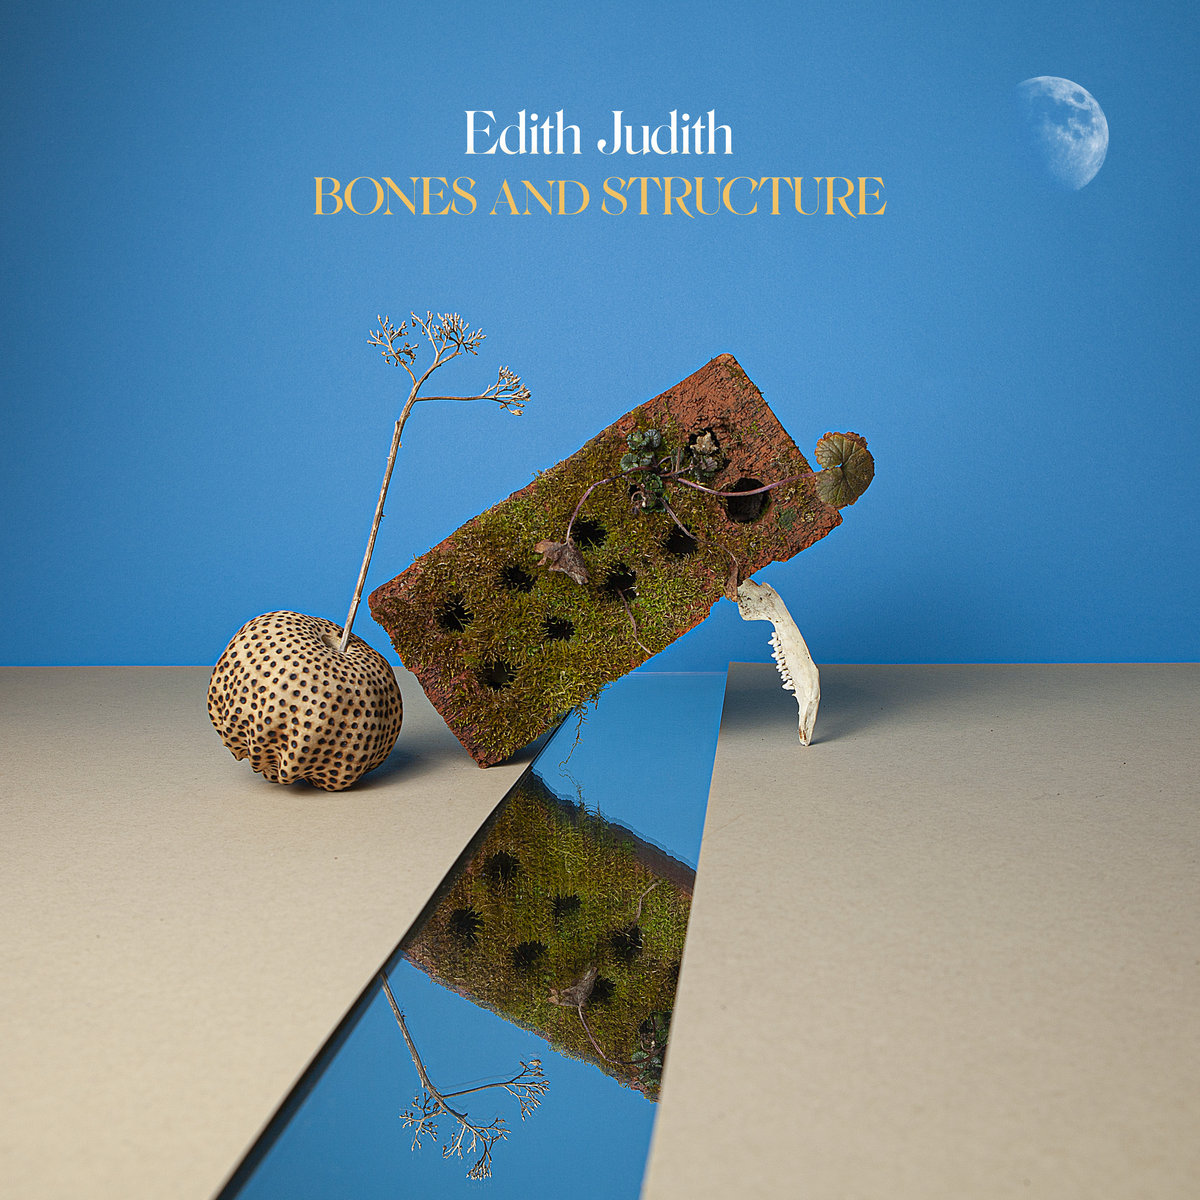 The artwork for Bones & Structure by Edith Judith featuring a mossy brick balance at a forty-five degree angle over a mirror against a blue background and a moon in the top corner